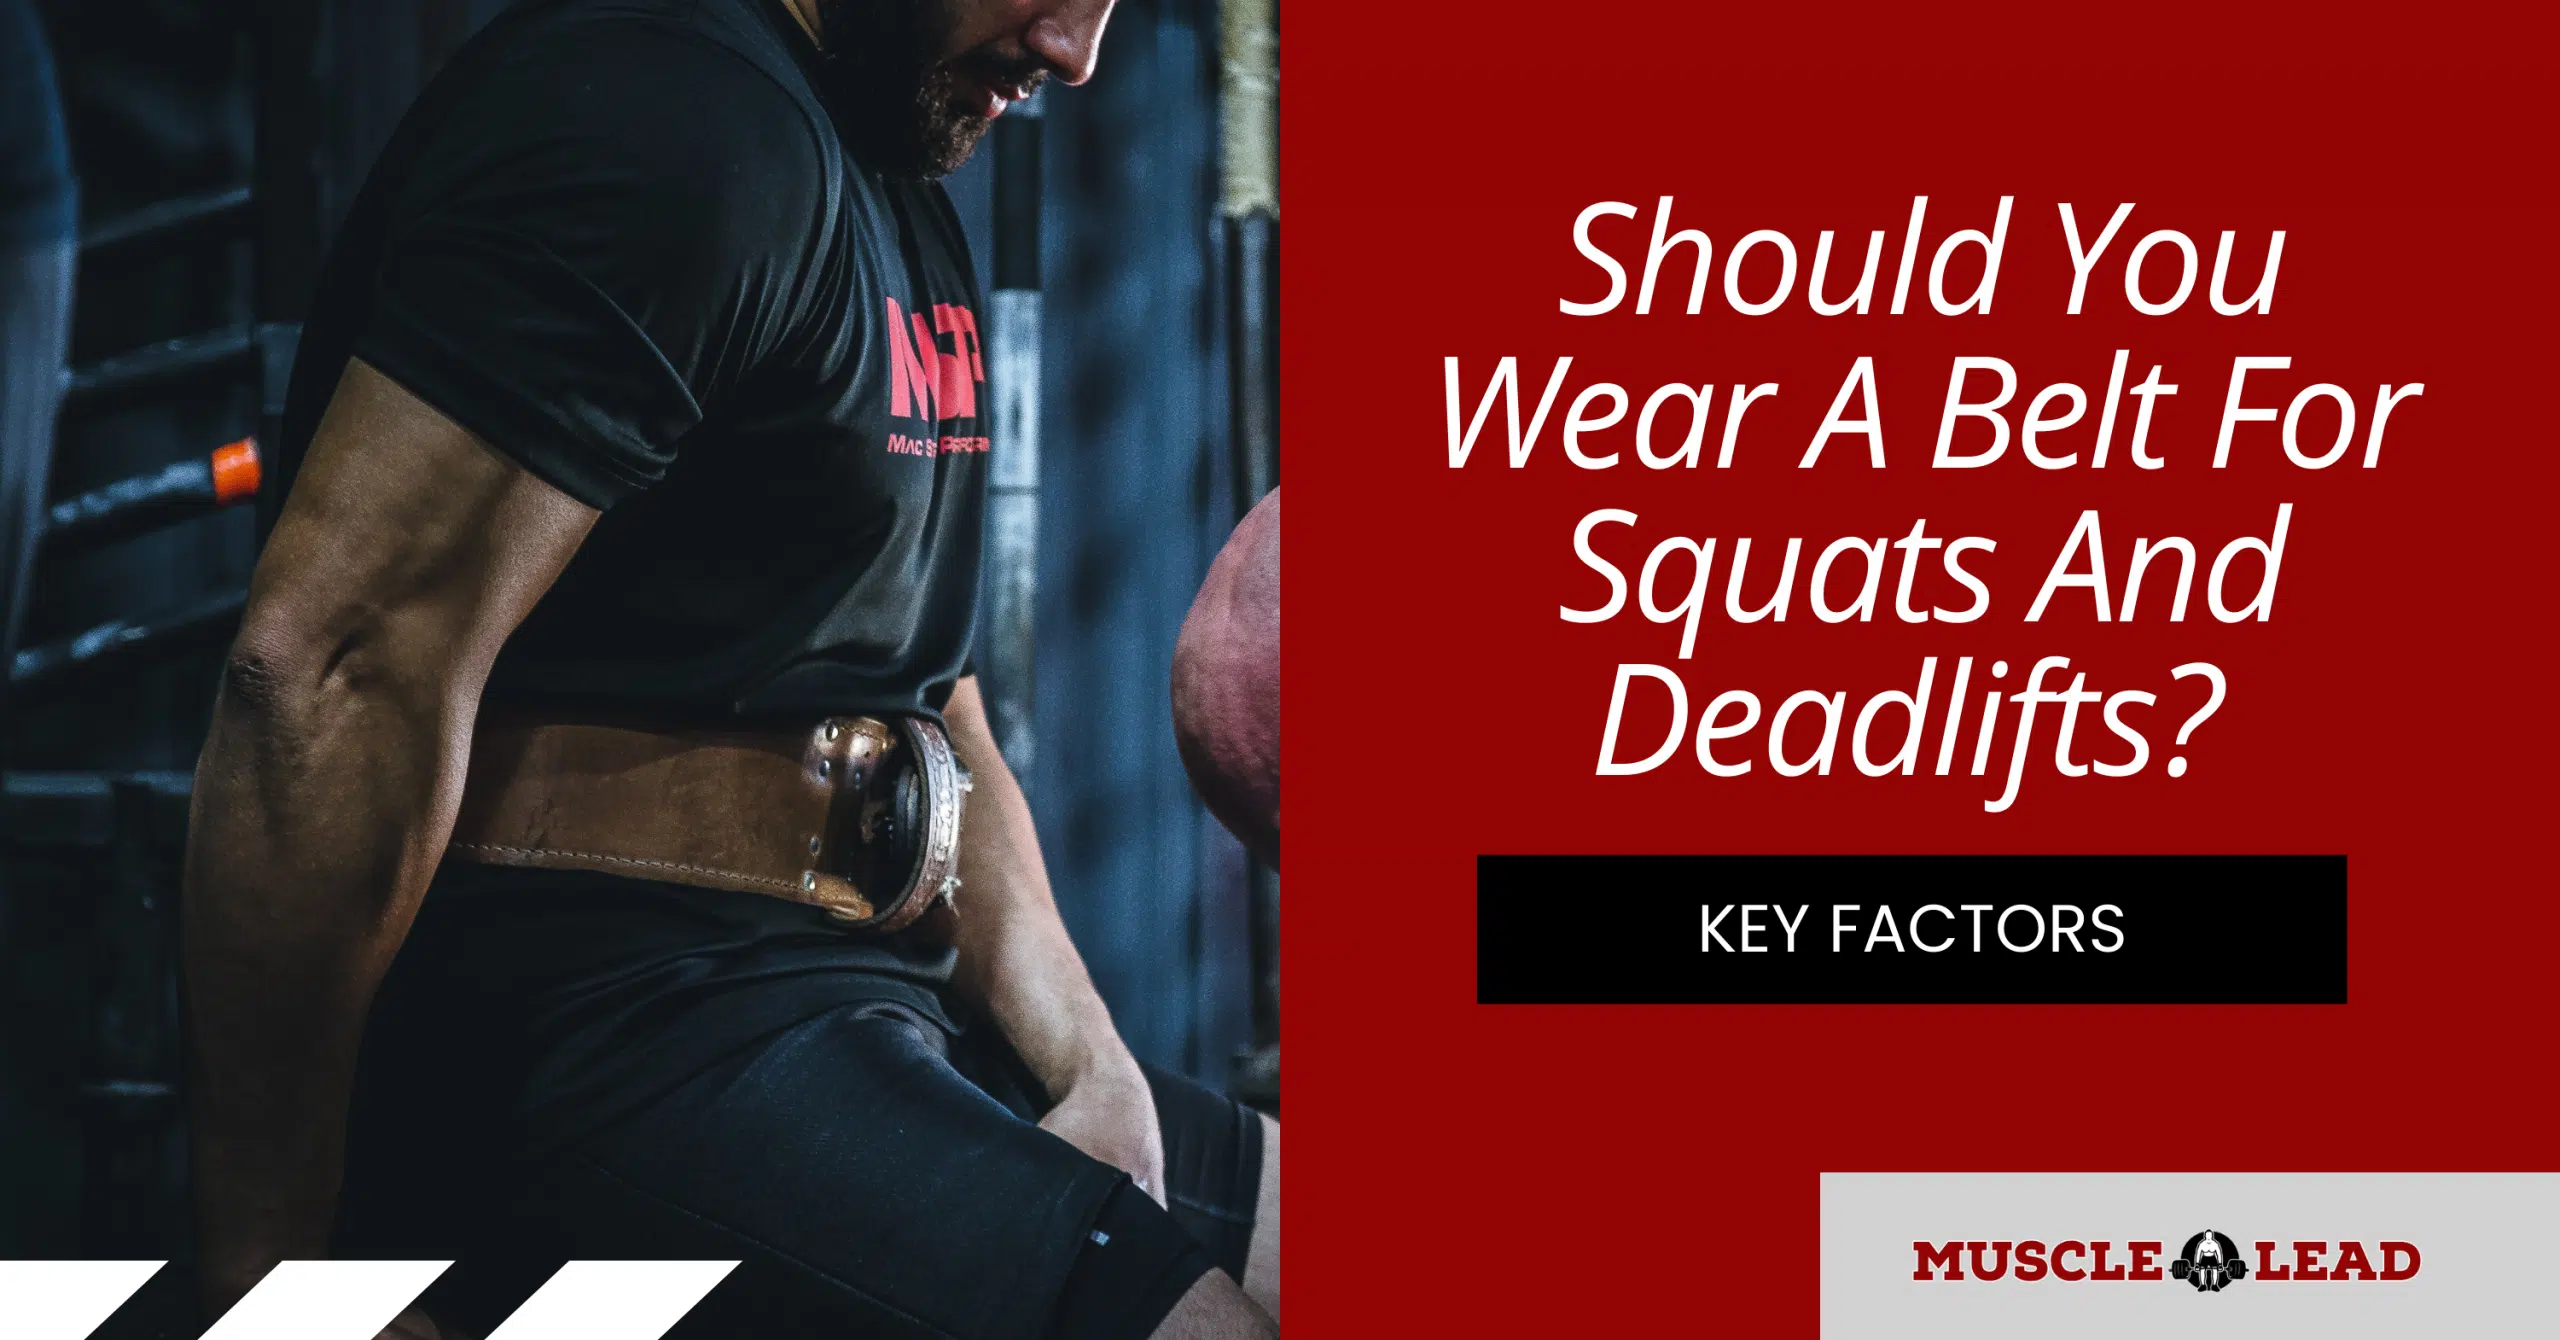 should you wear a lifting belt for squats and deadlifts